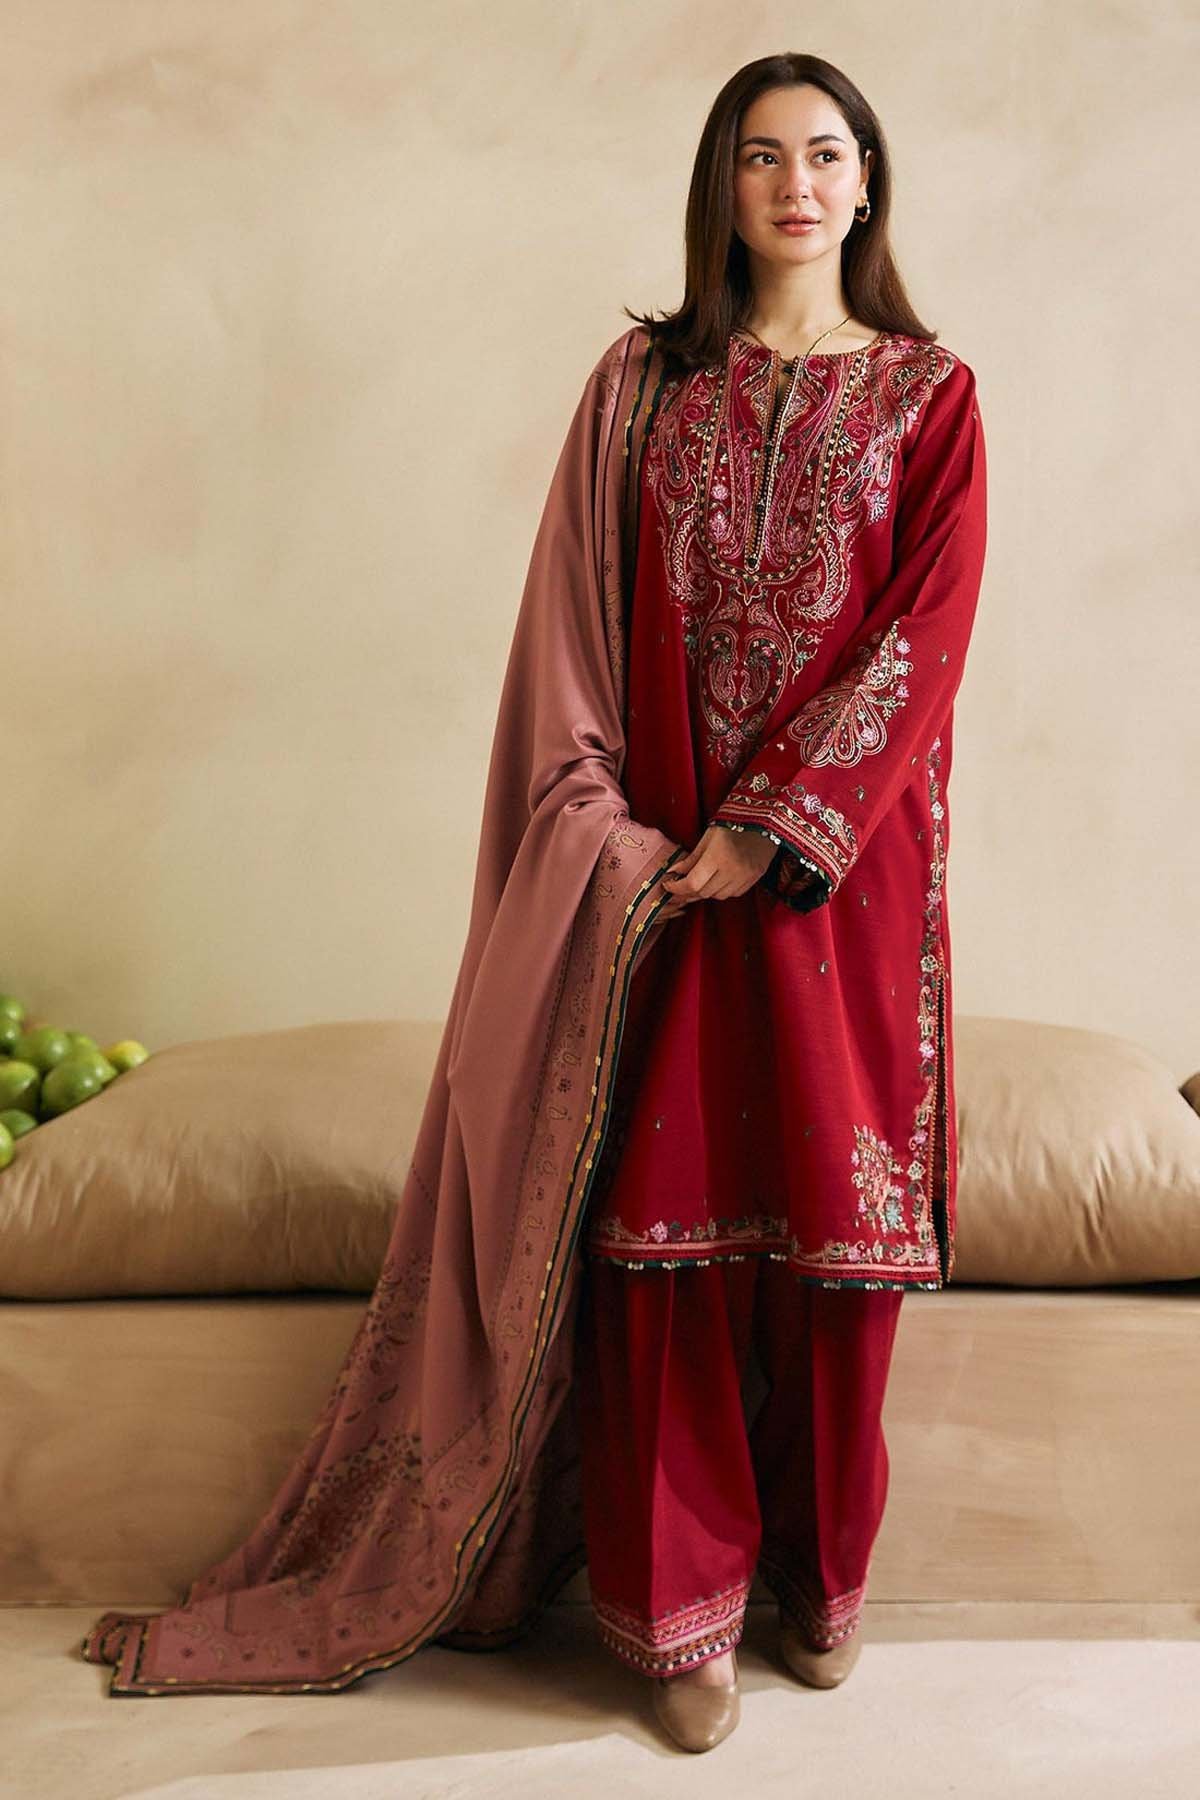 women new dress design zara shah red winters suit empires collection Pakistan girls fashion 2024 clothing